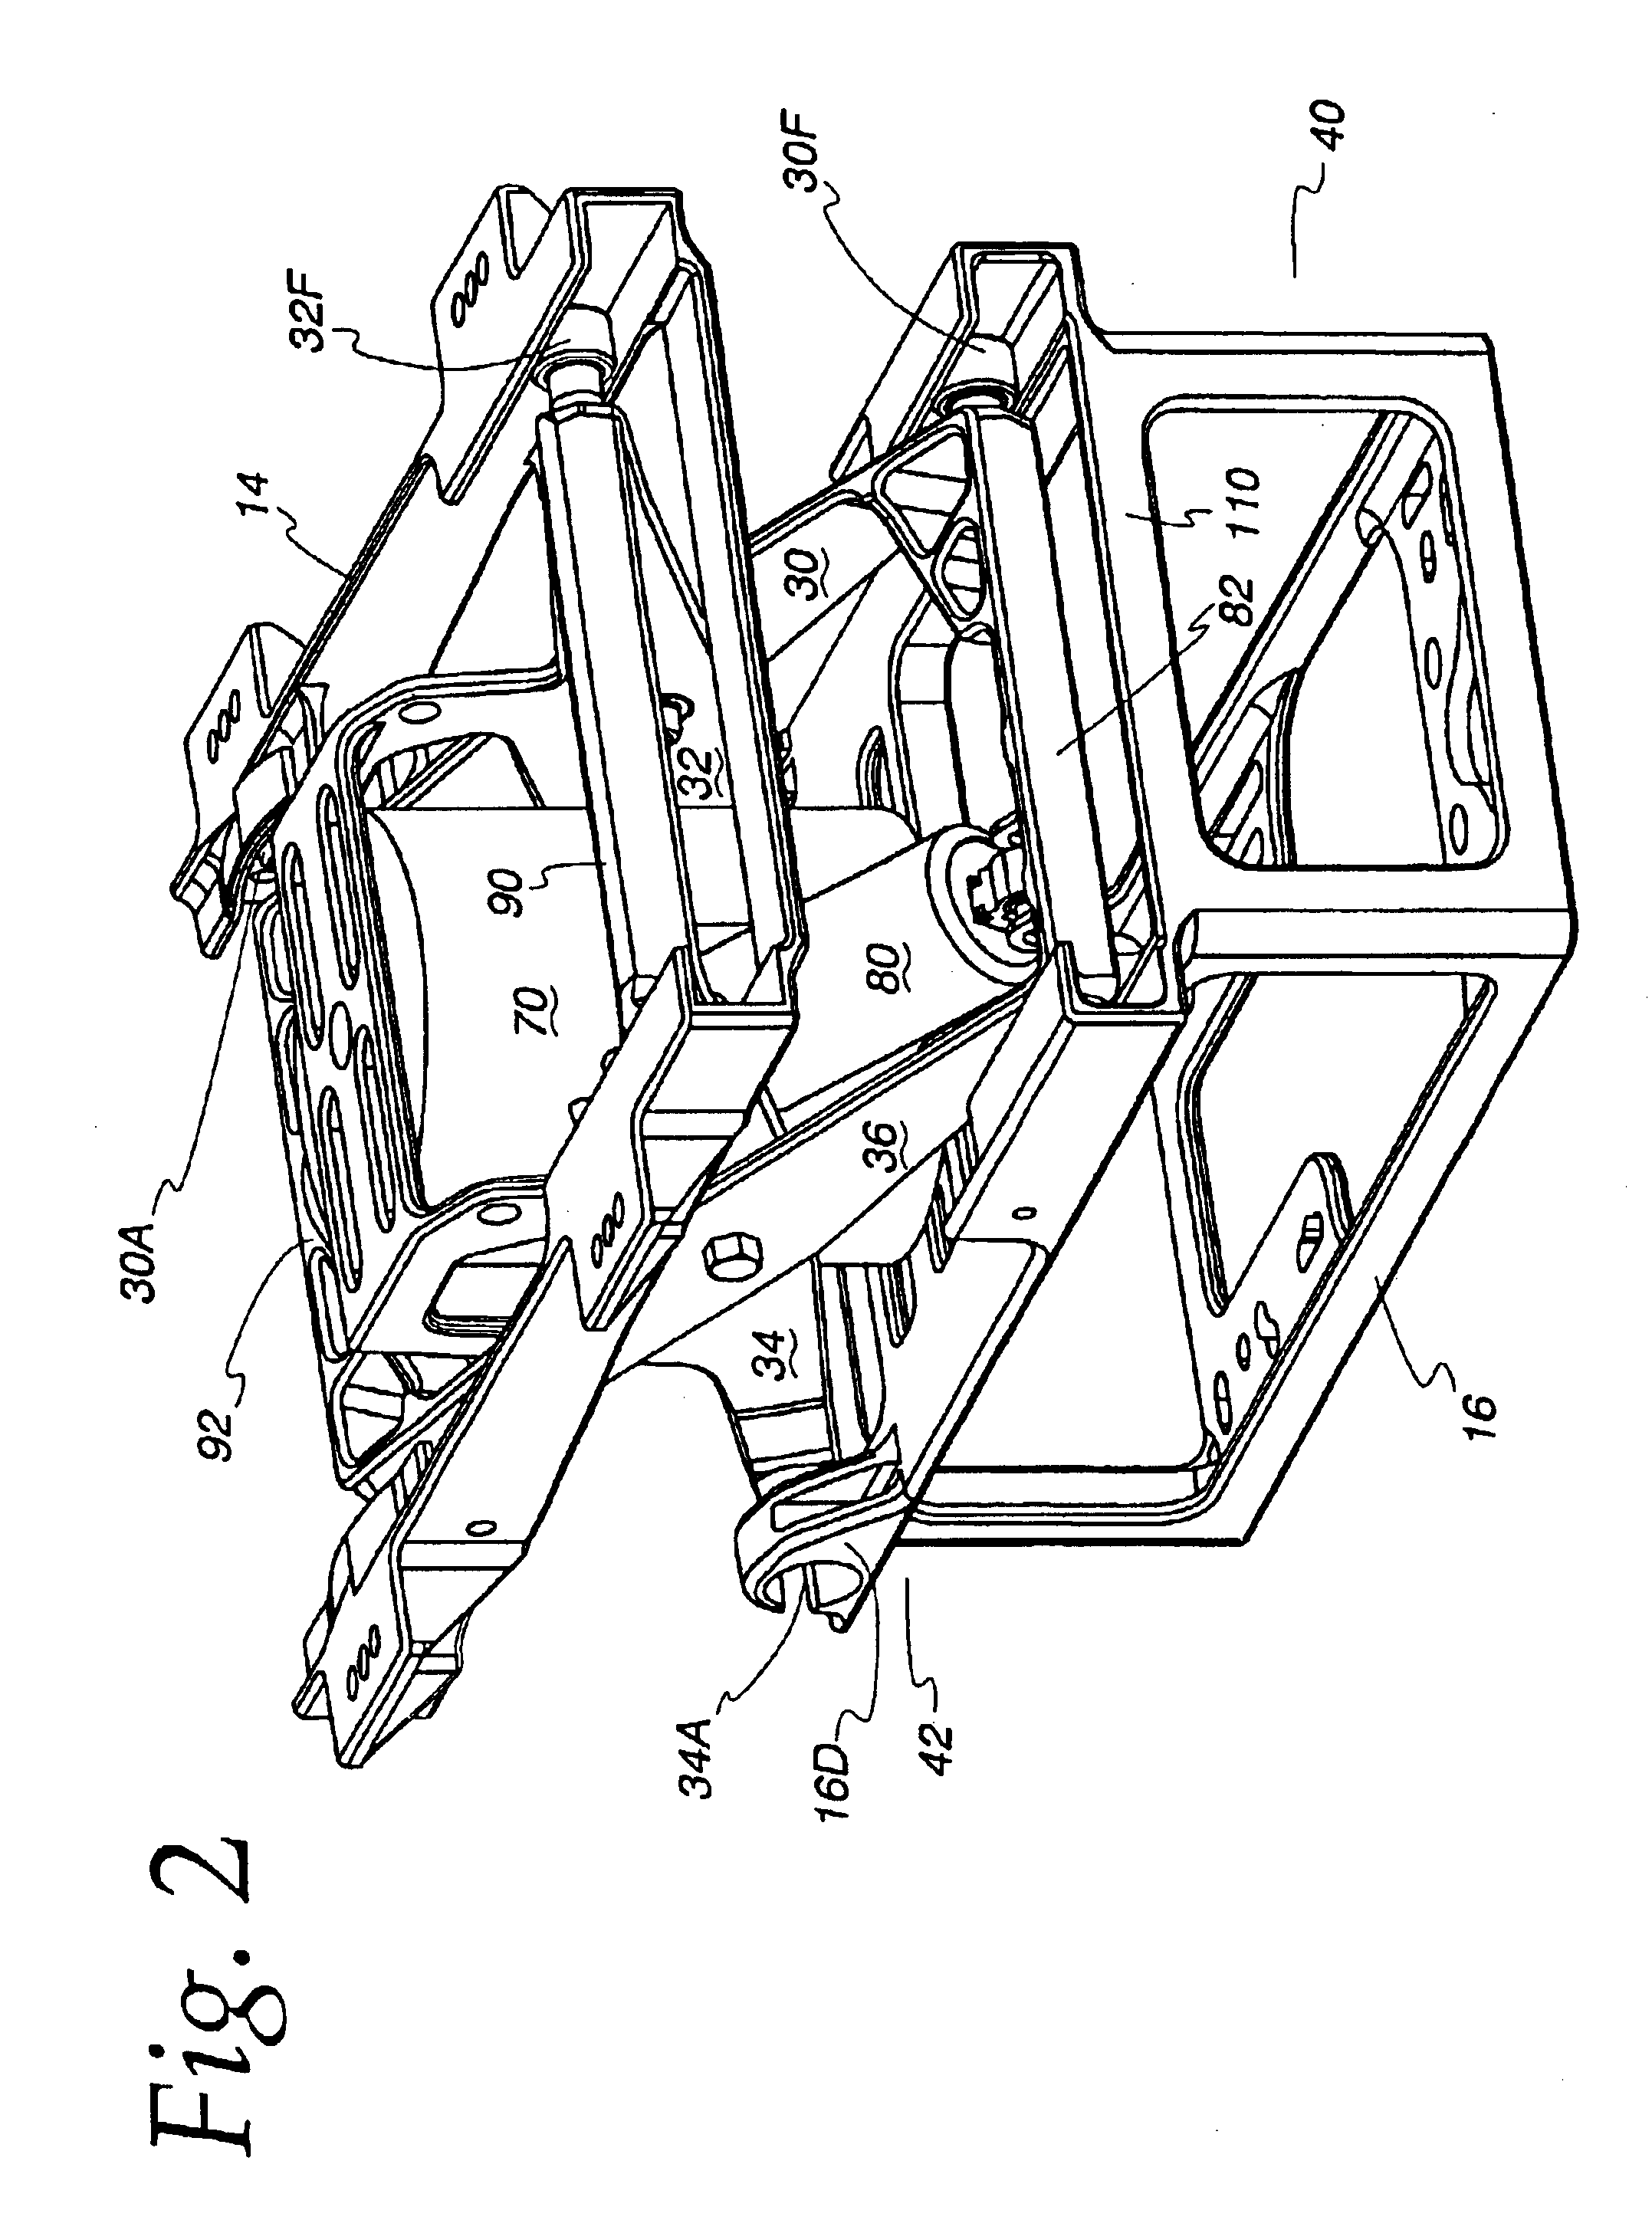 Vehicle seating system with improved vibration isolation